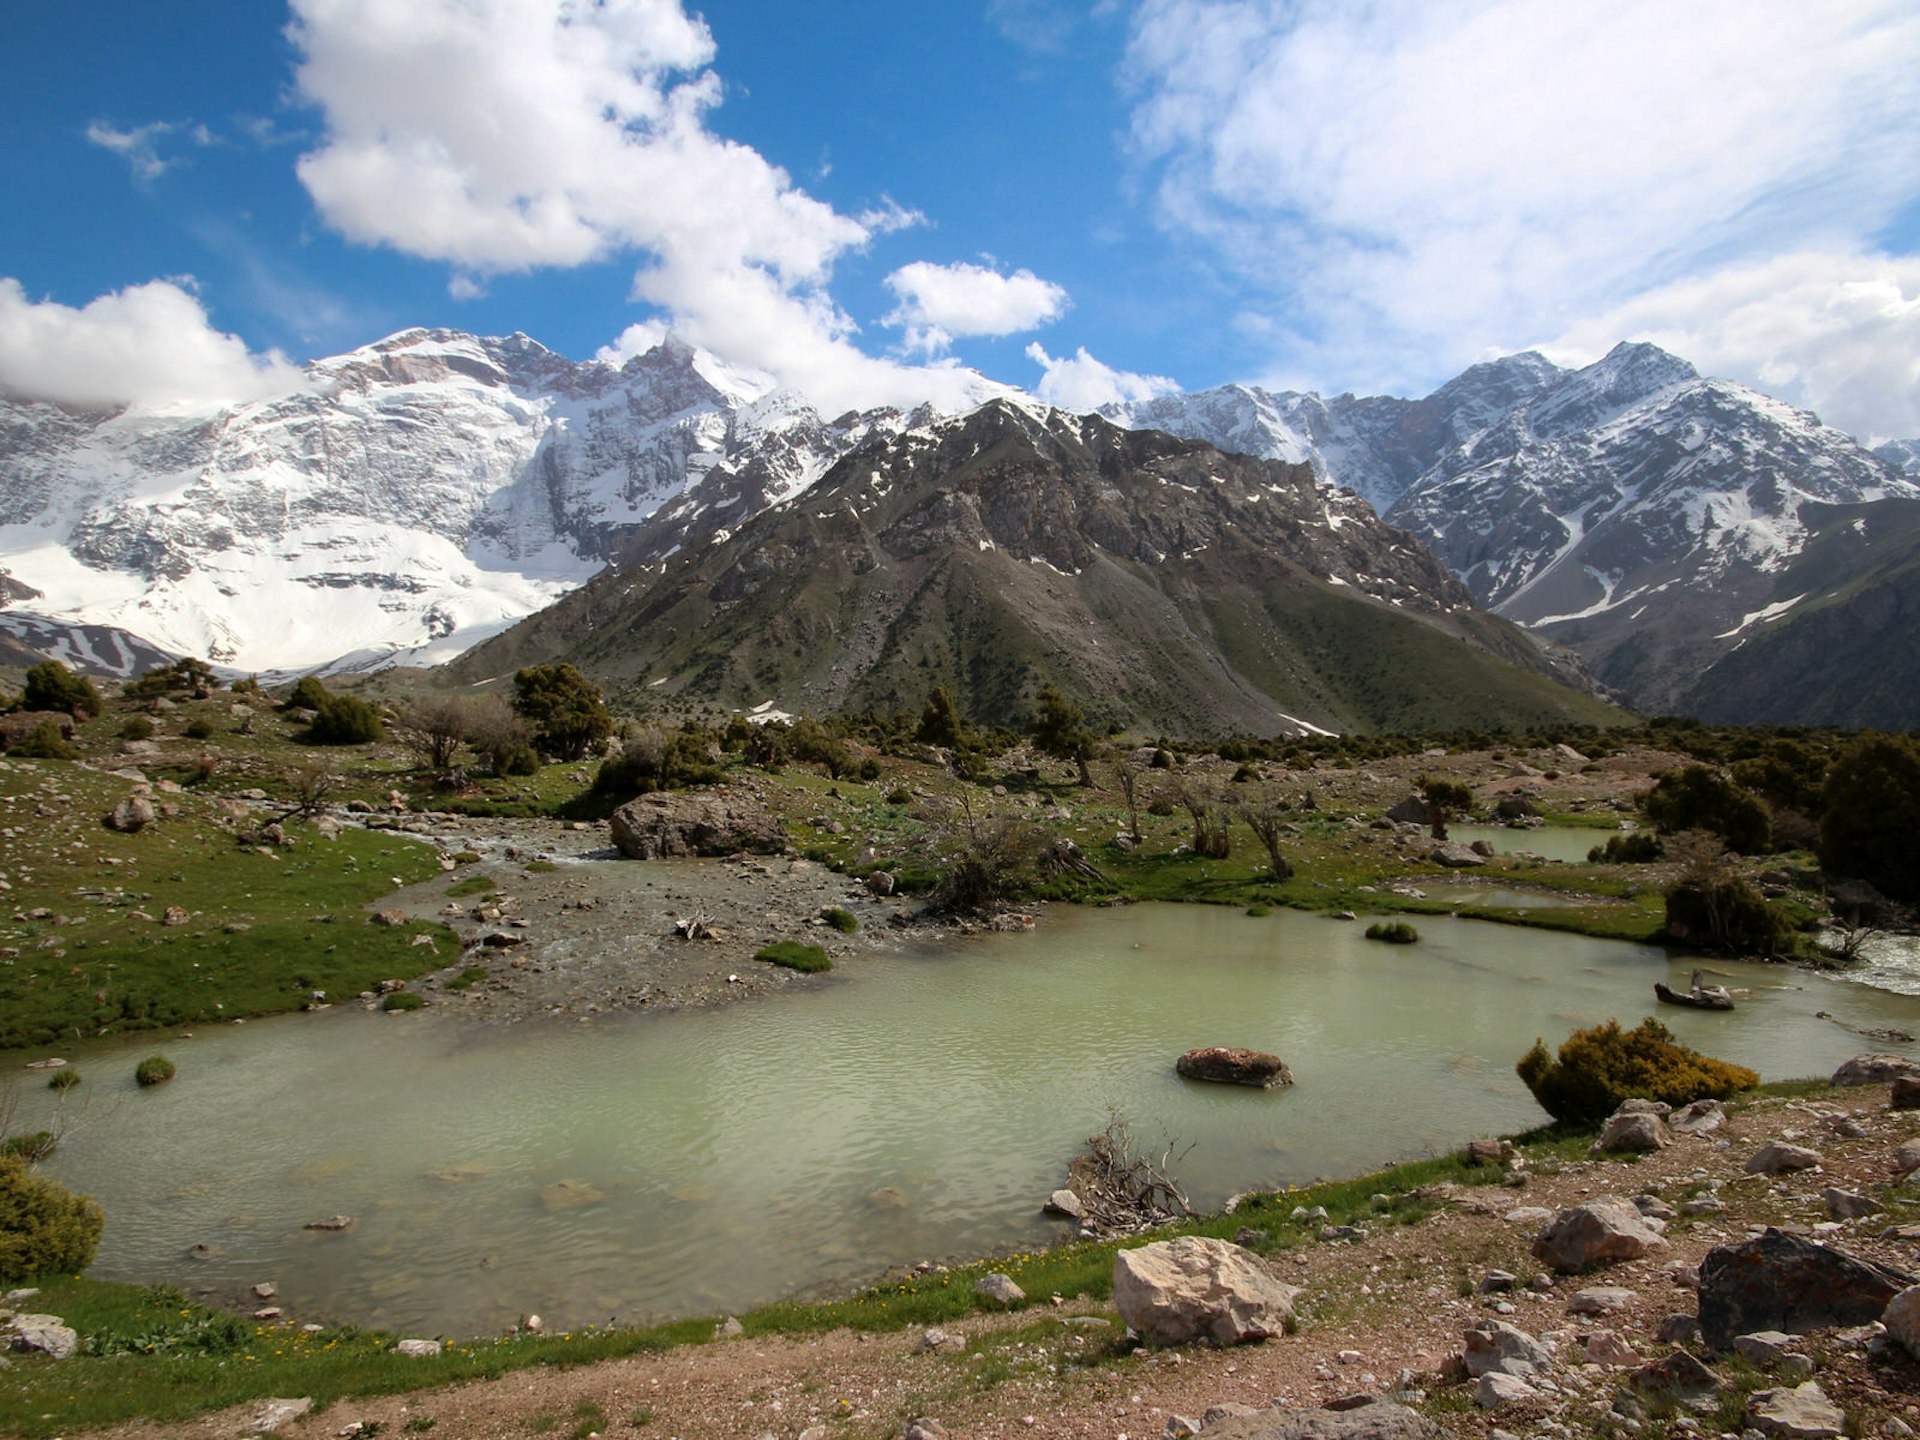 A small green lake in the foreground with snow-covered mountains and blue sky beyond. One of a dozen lakes in Tajikistan's Kulaikalon Basin © Stephen Lioy / Lonely Planet